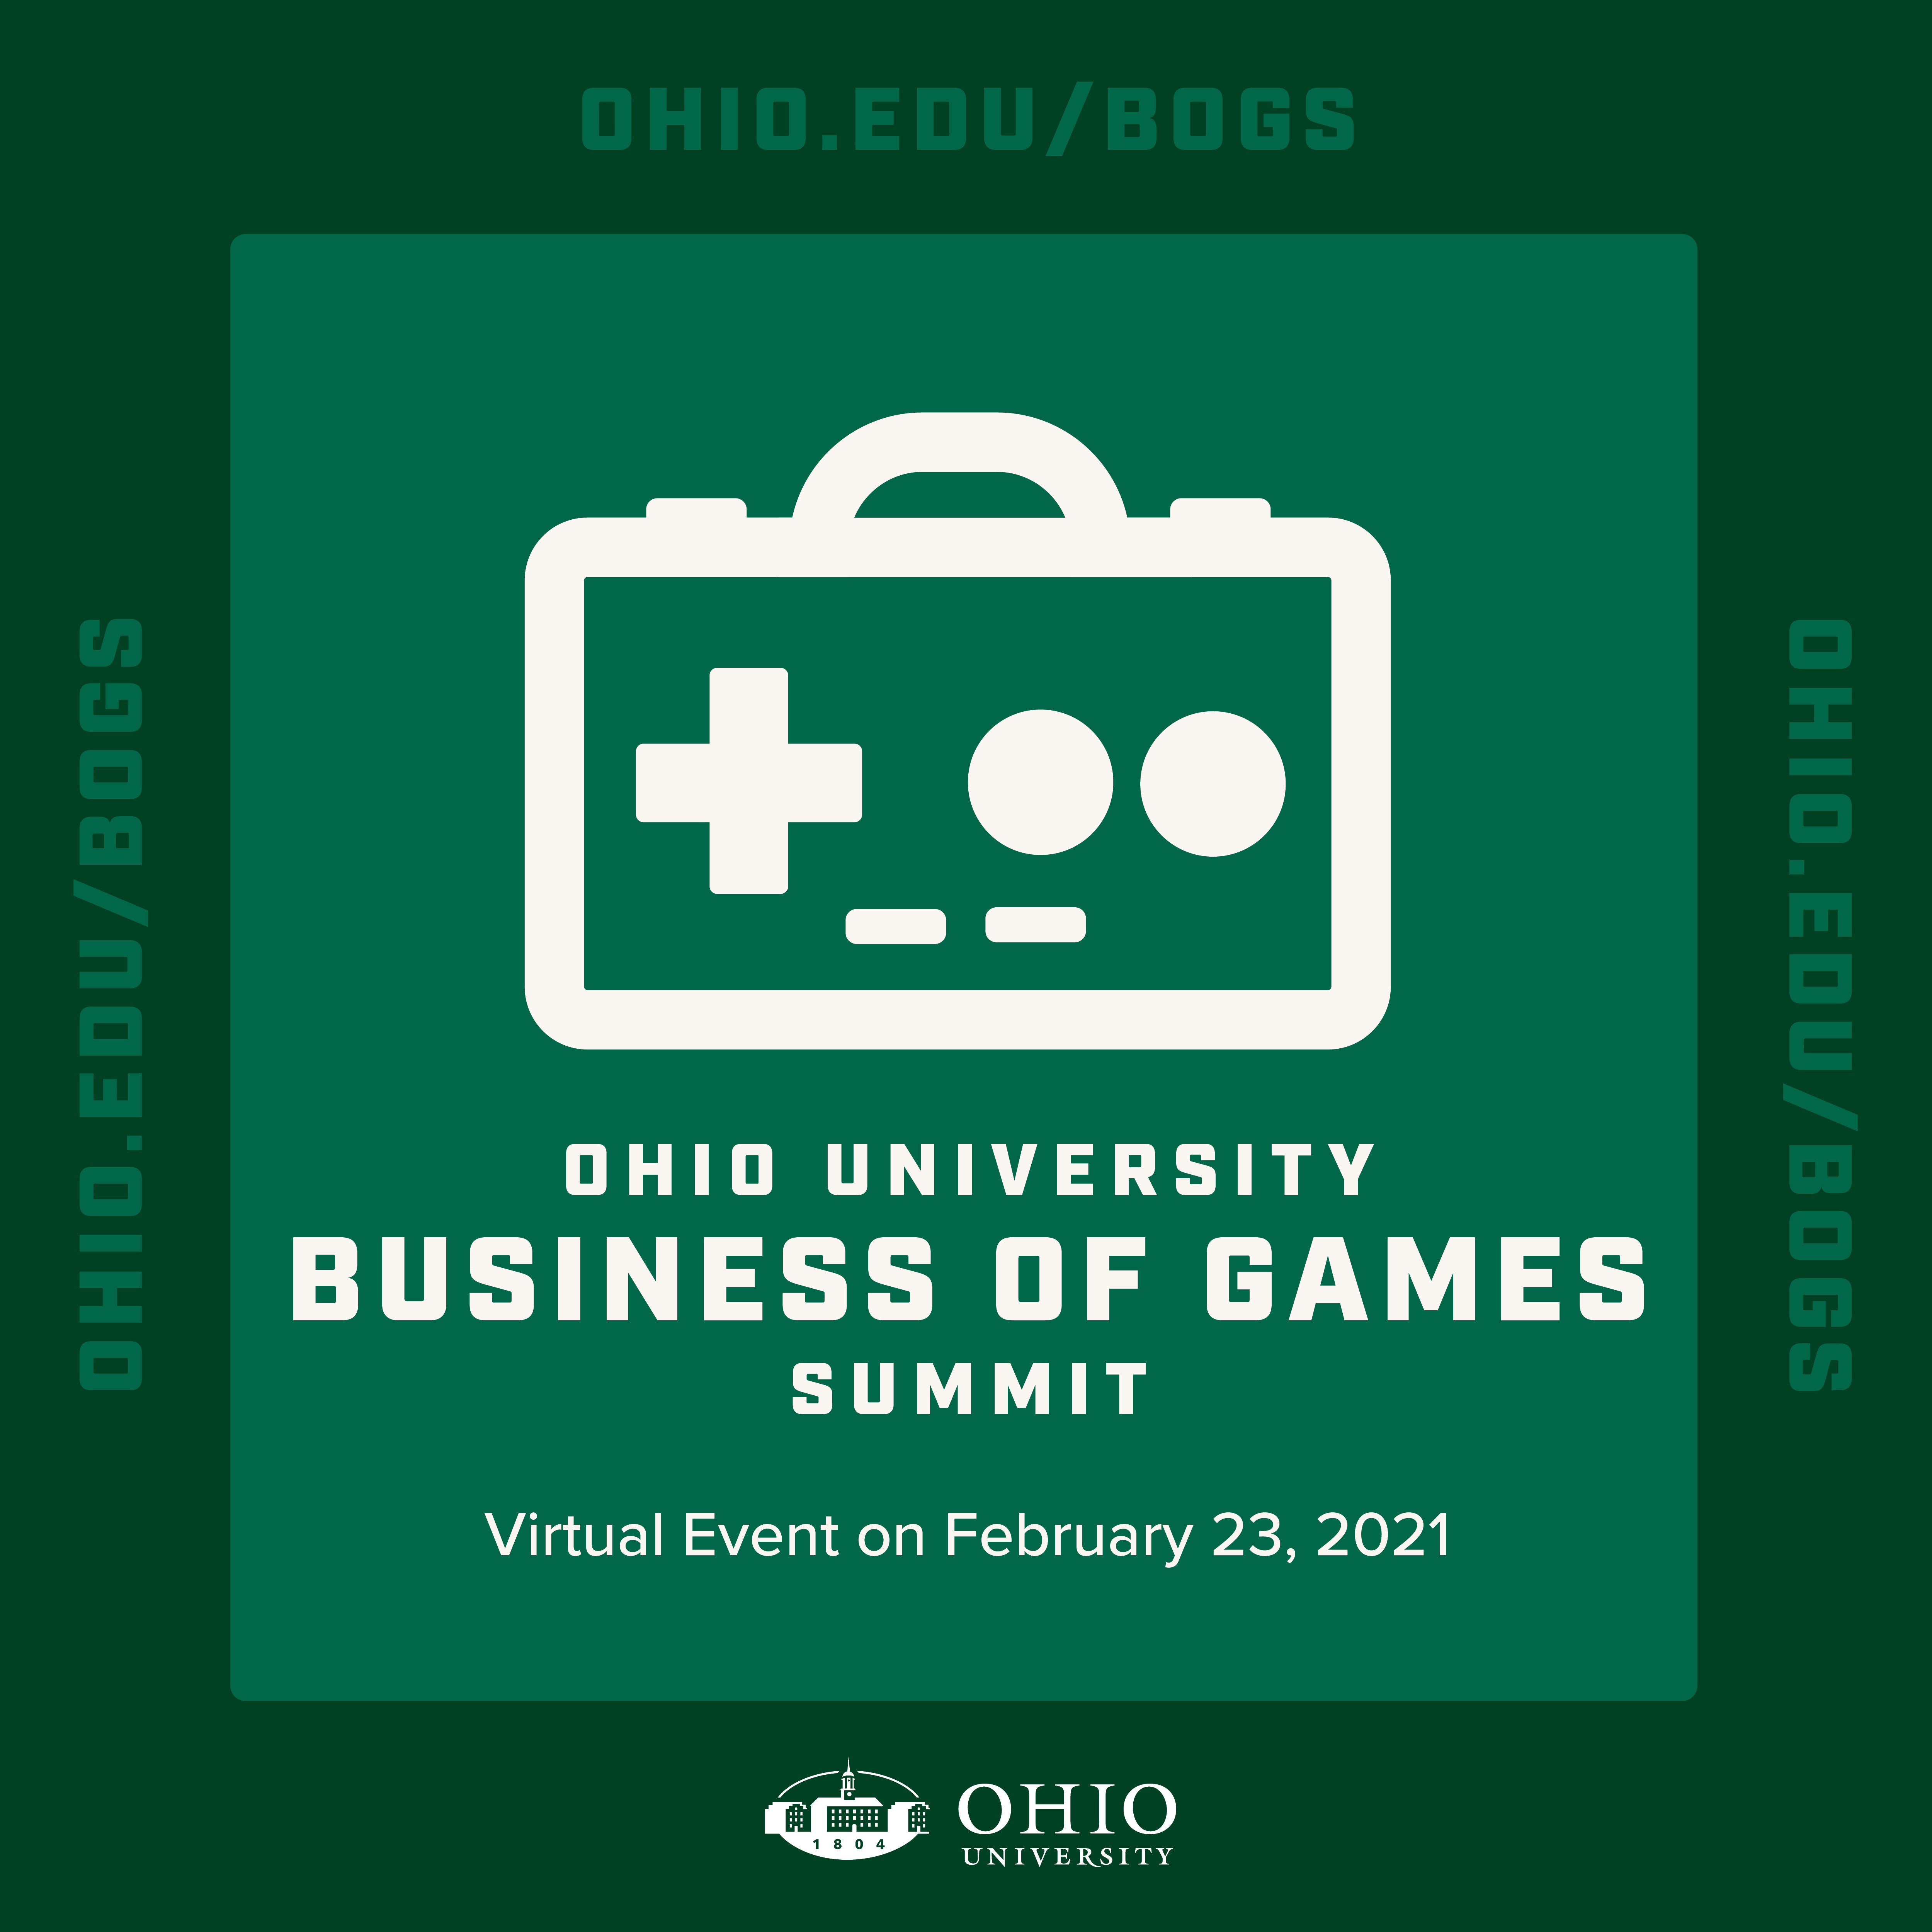 Business of Games Summit